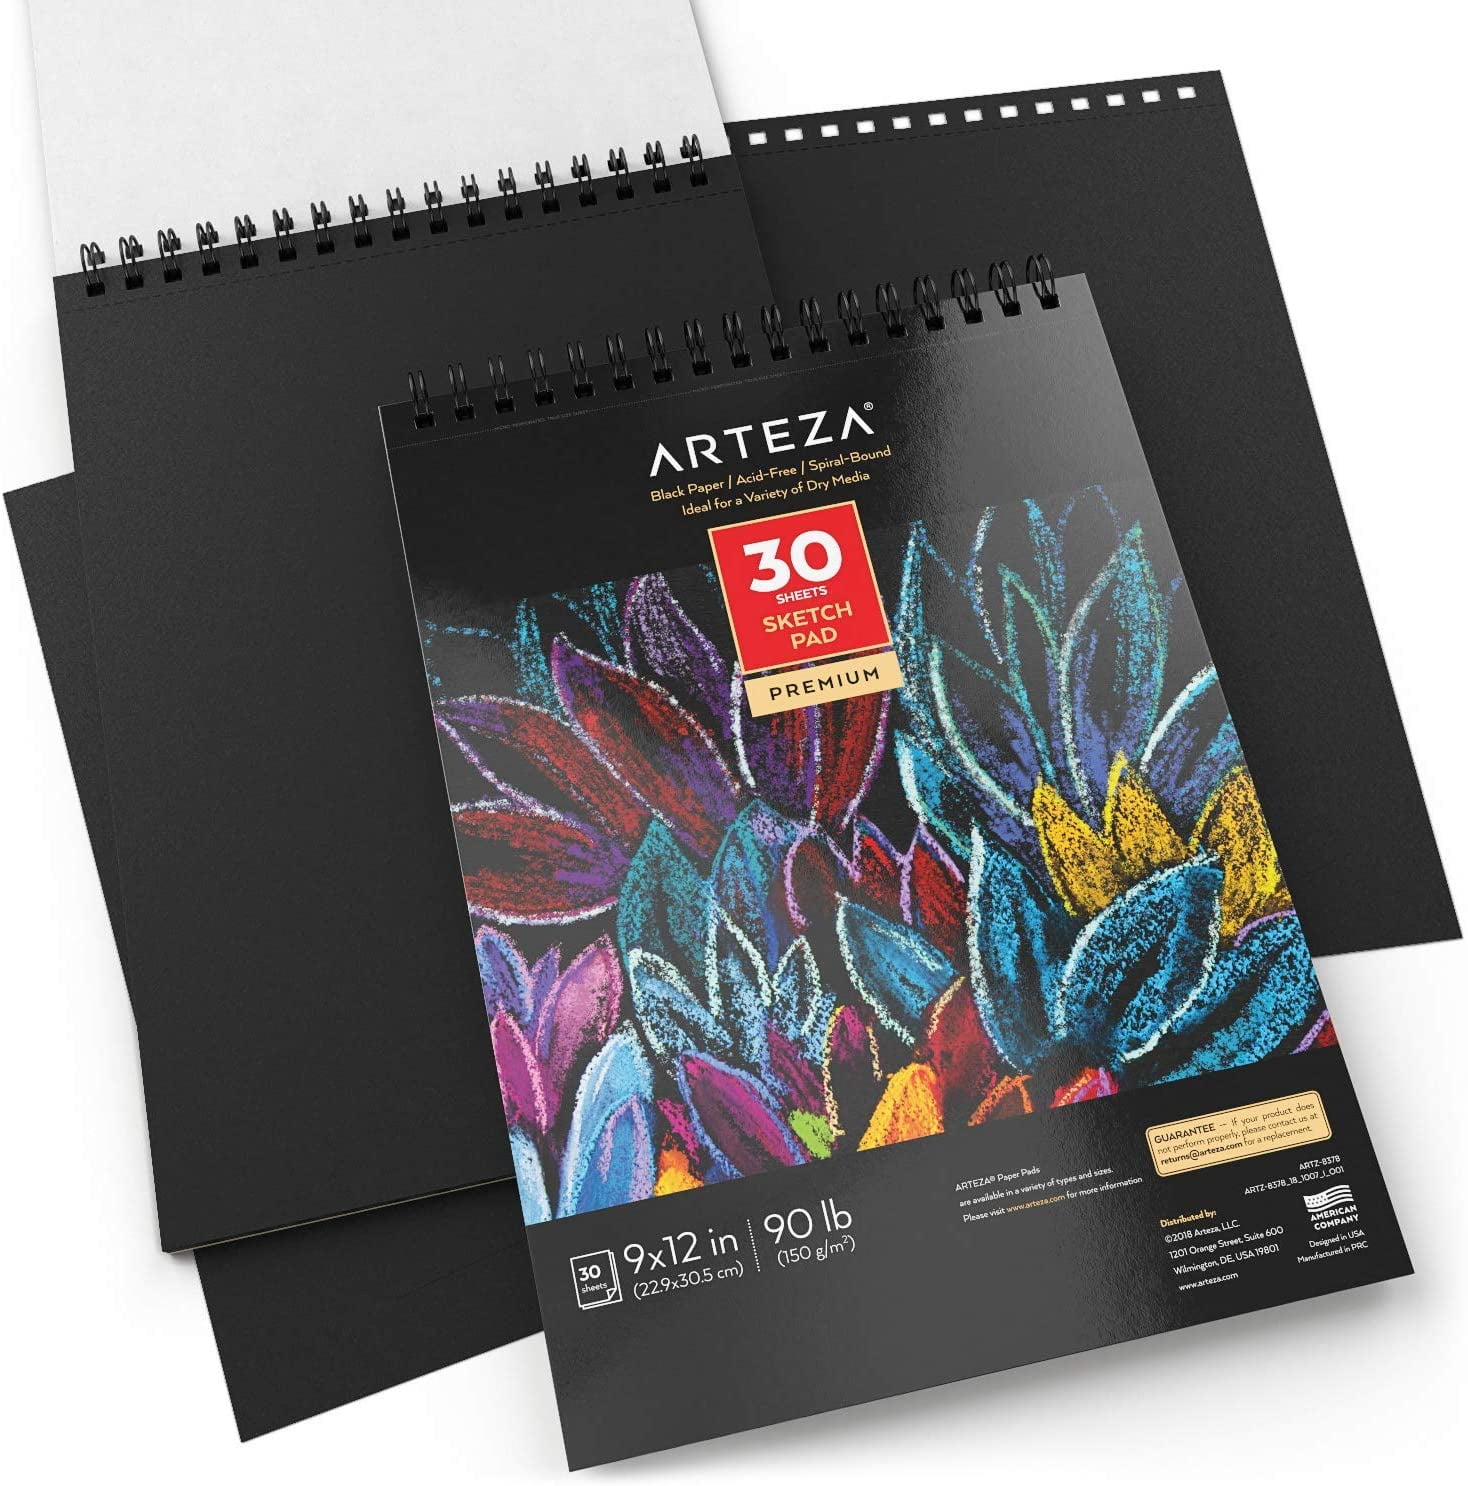 Arteza Sketchbook, Spiral-Bound Hardcover, Black, 9x12 inch, 200 Pages of Drawing Paper Each - 2 Pack